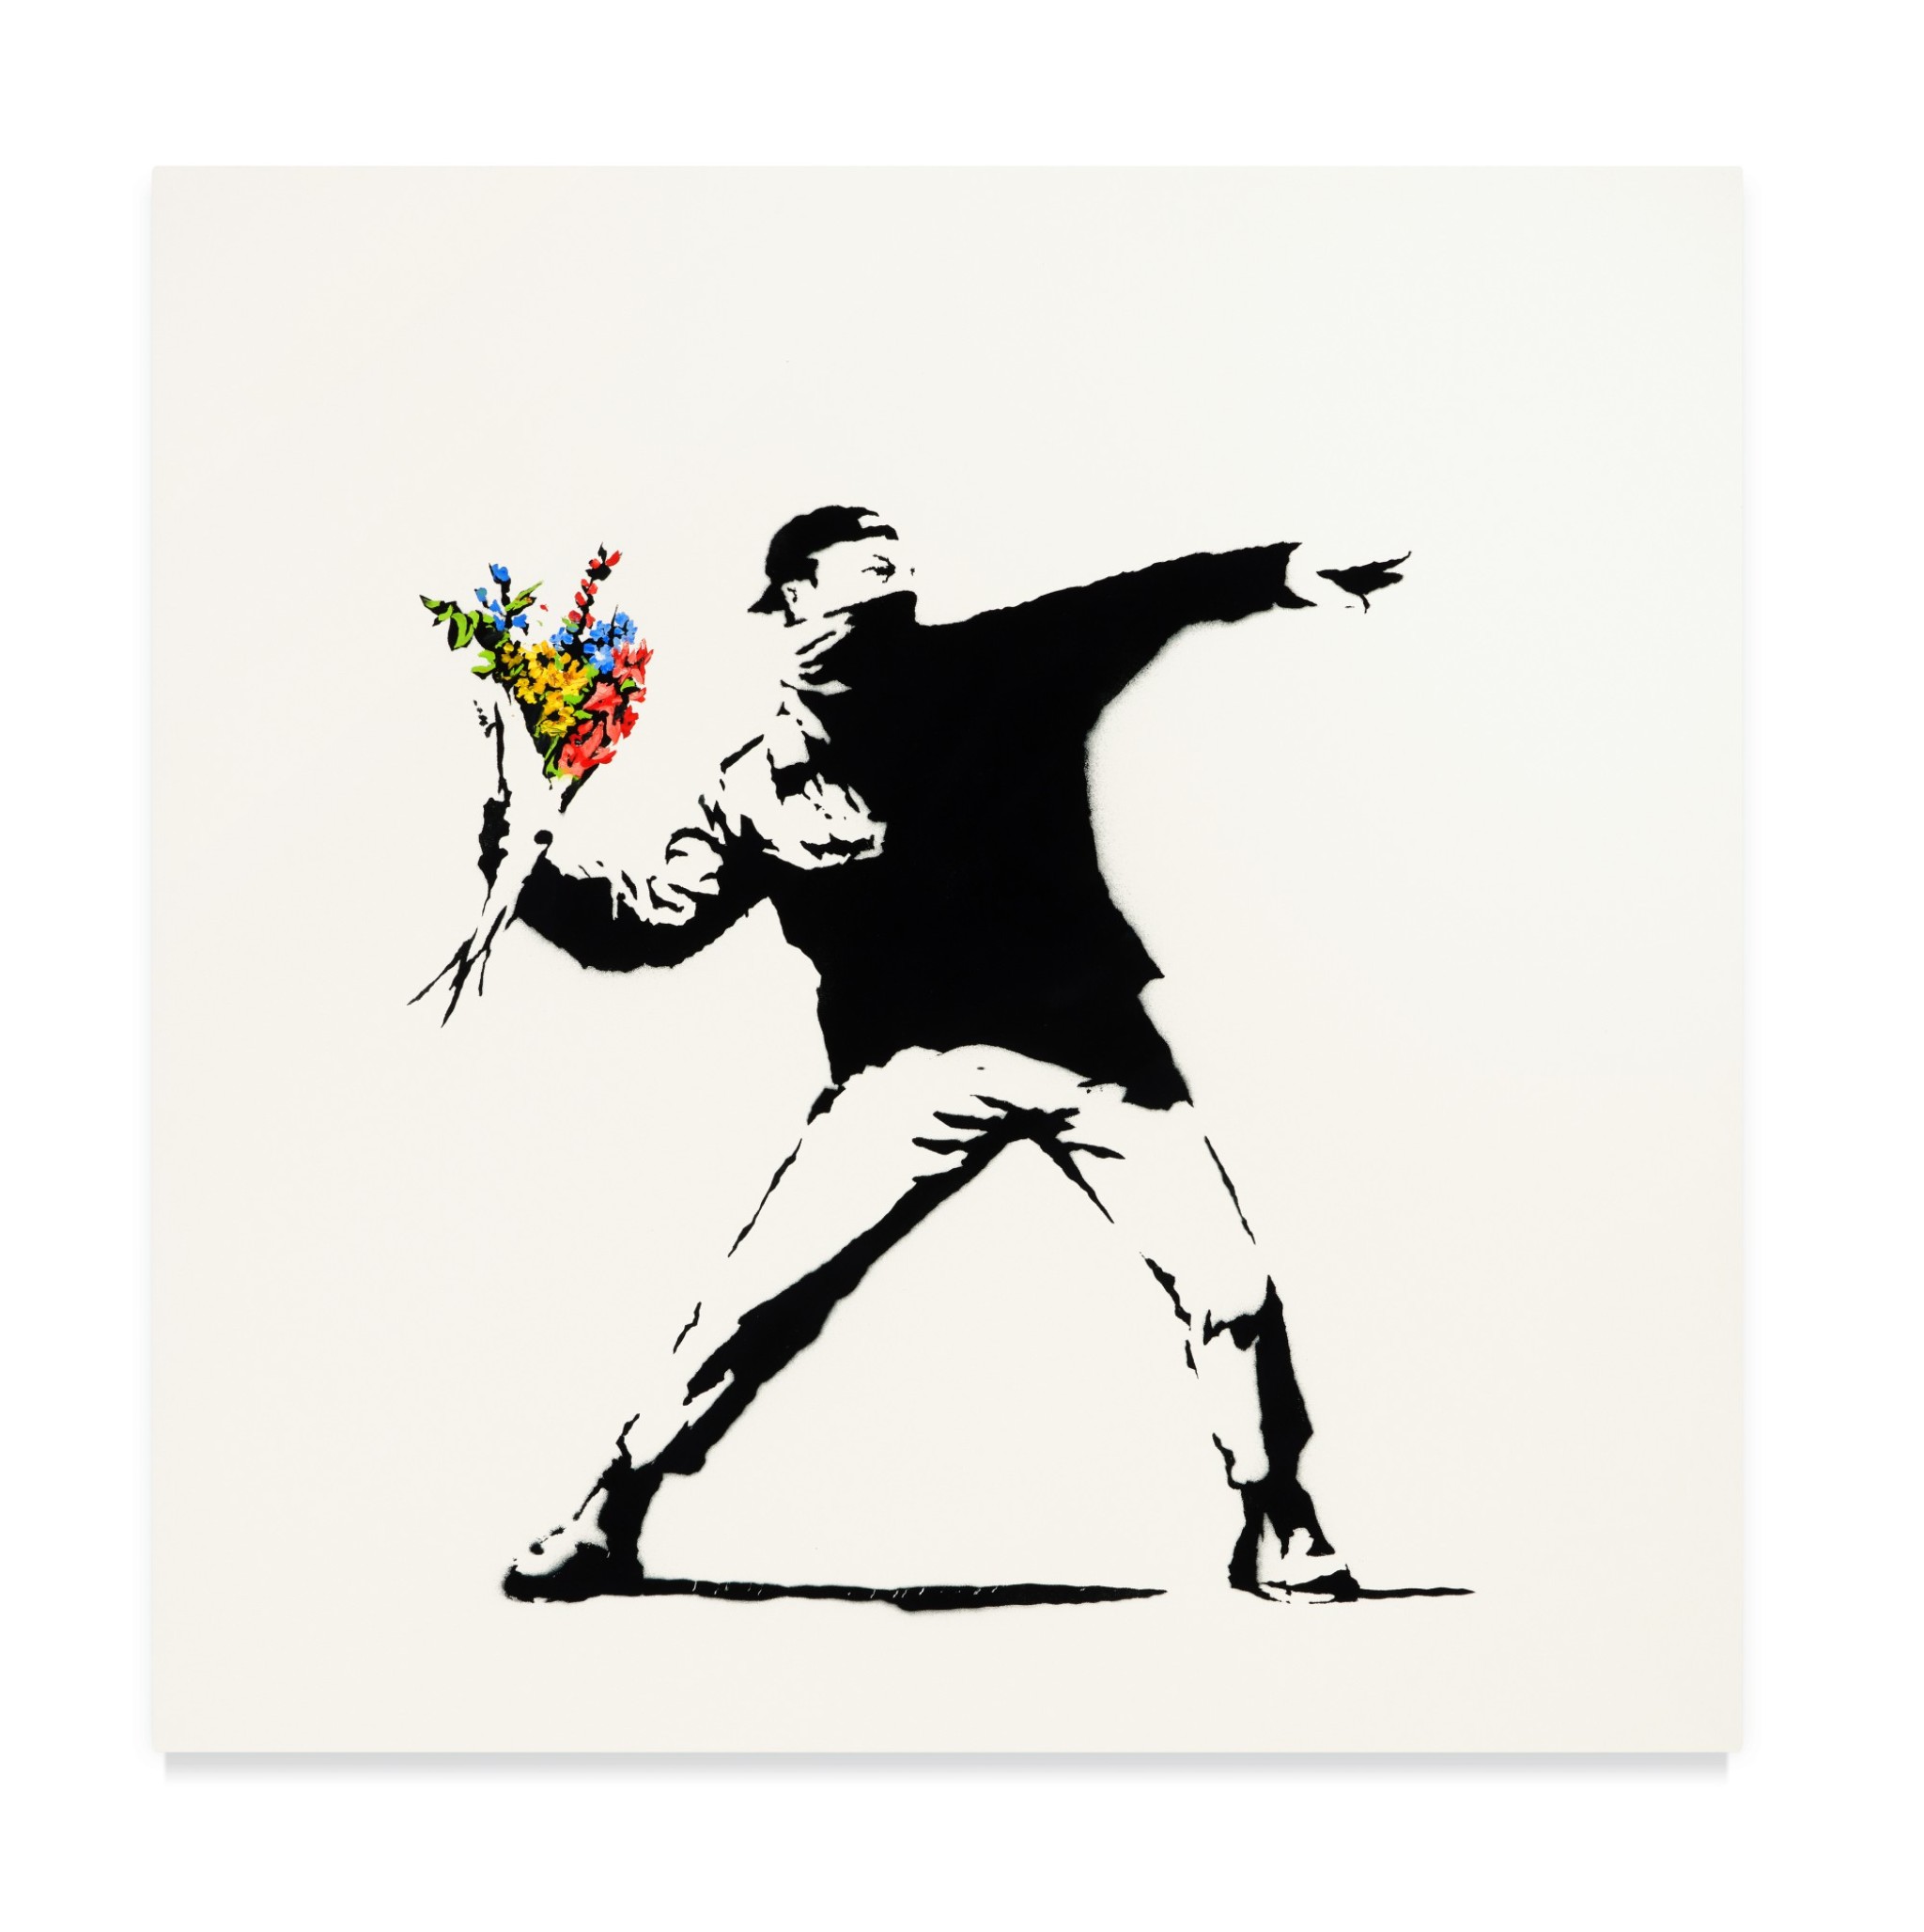 Banksy work garners $13 mn a Sotheby’s cryptocurrency-enabled auction (and more art updates)